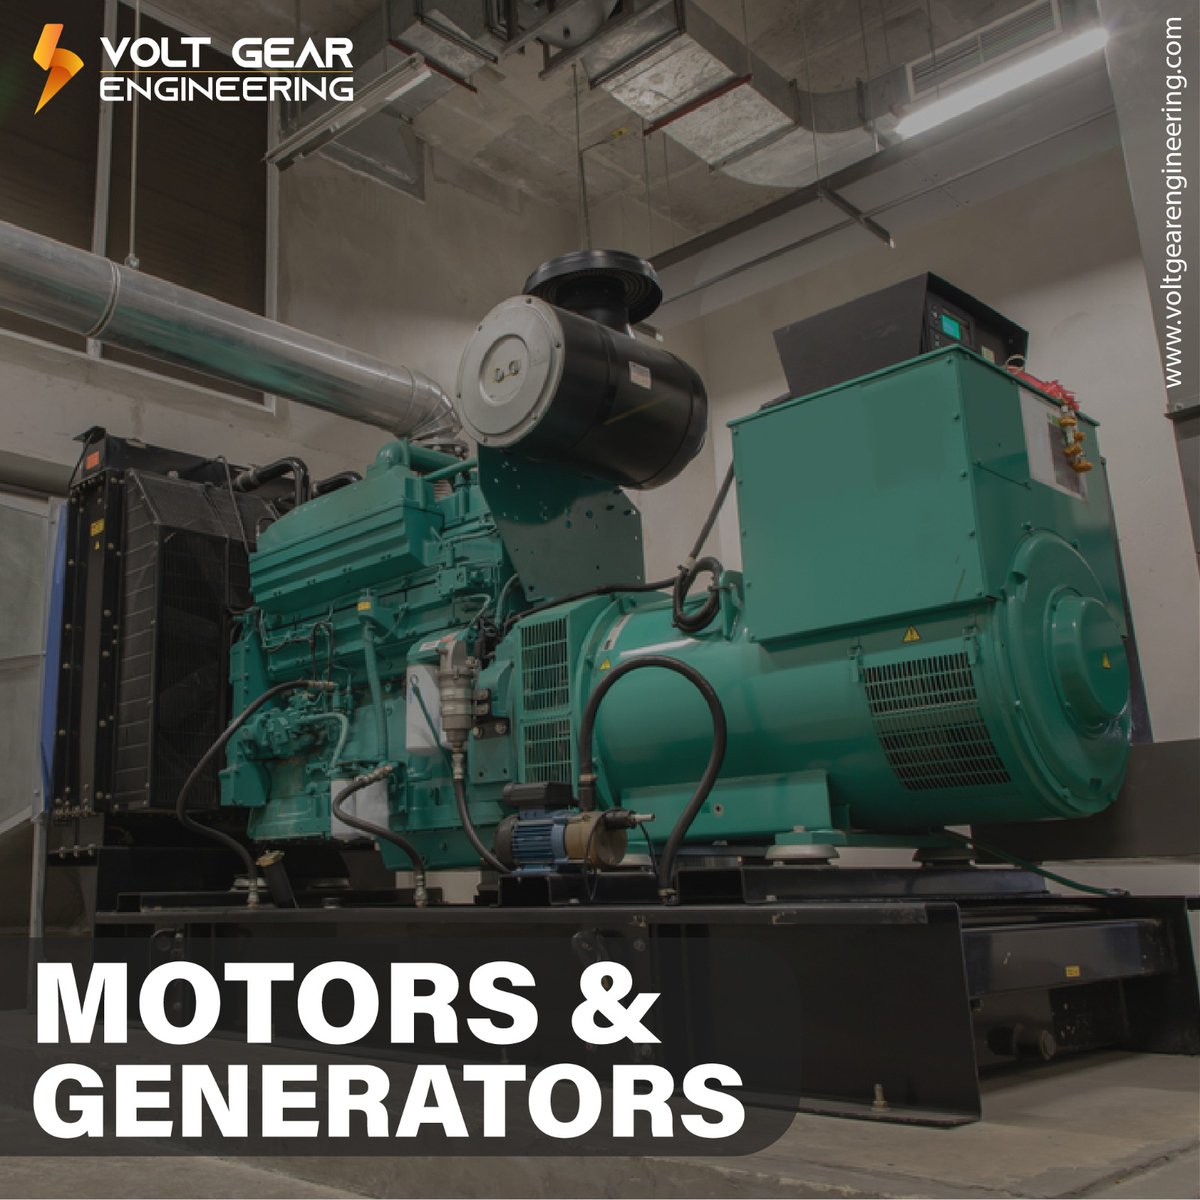 Power up your business with our reliable and efficient motors and generators, delivering unmatched performance and durability ⚡🔌
.
.
#motorsandgenerators #voltgearengineering #InnovationNation